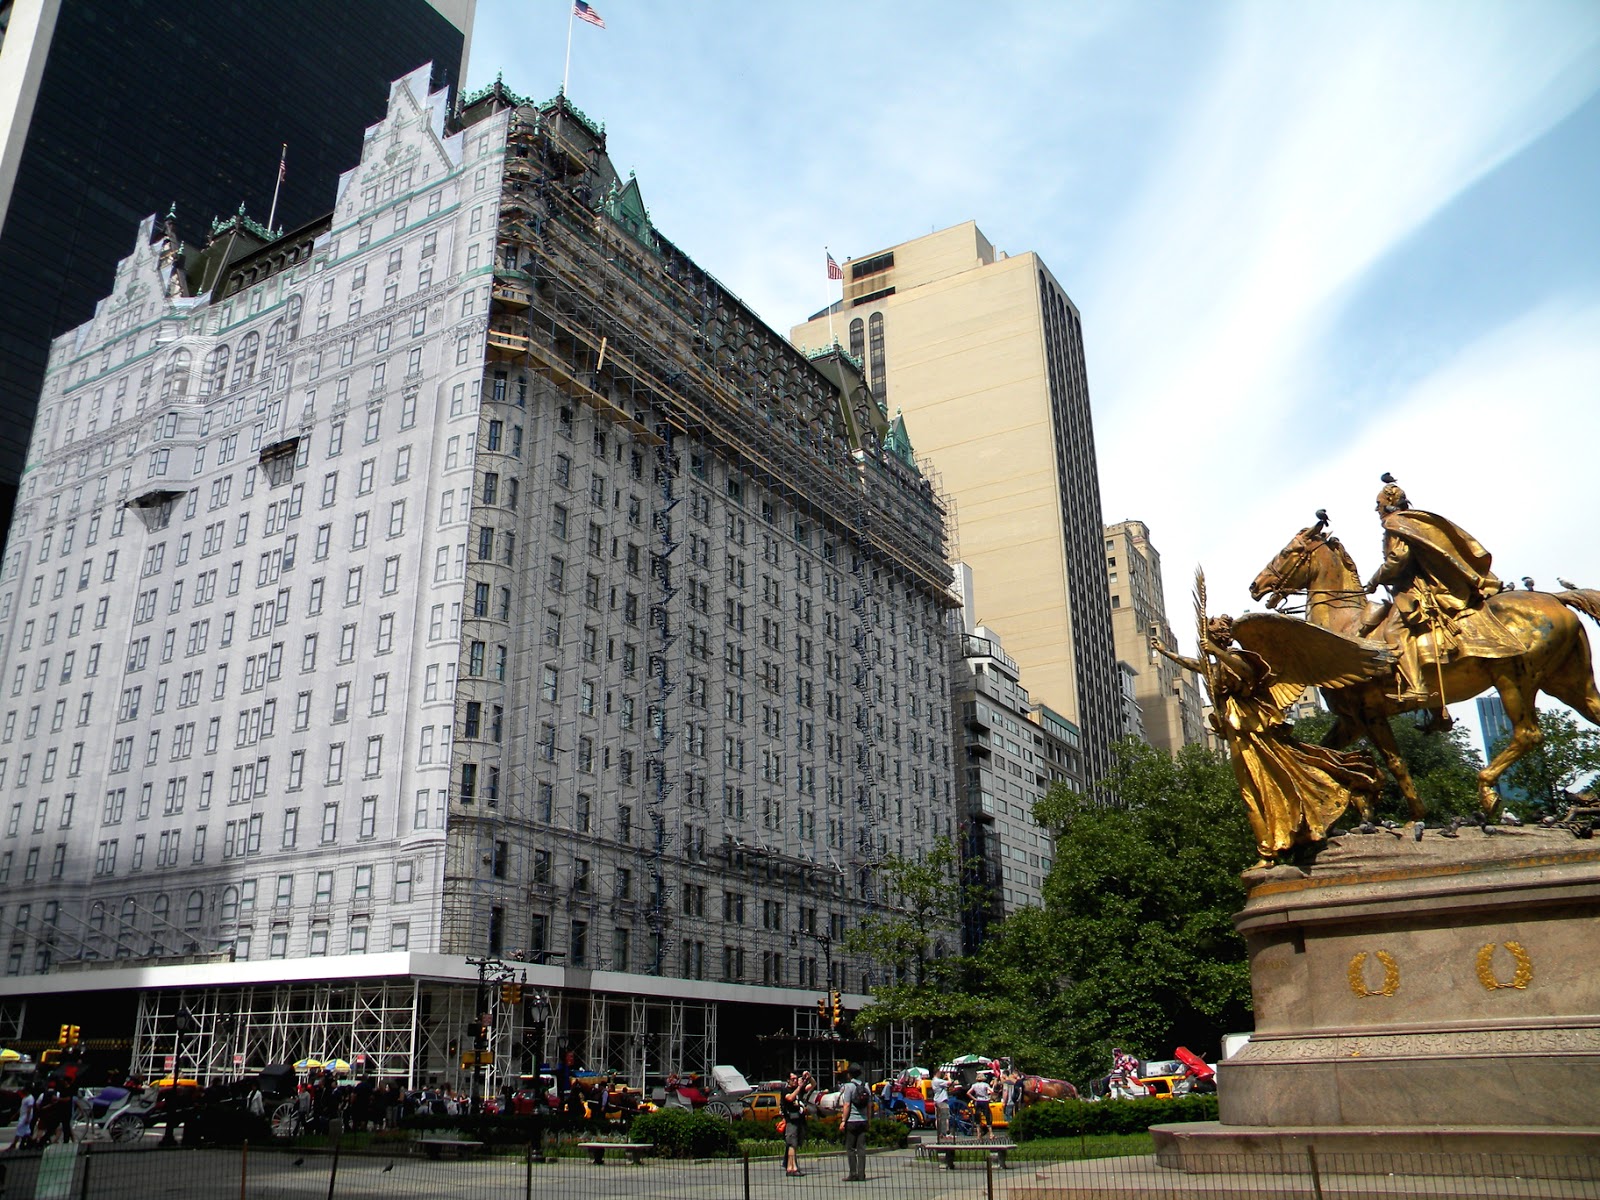 The Plaza Hotel Public Domain Clip Art Photos and Images